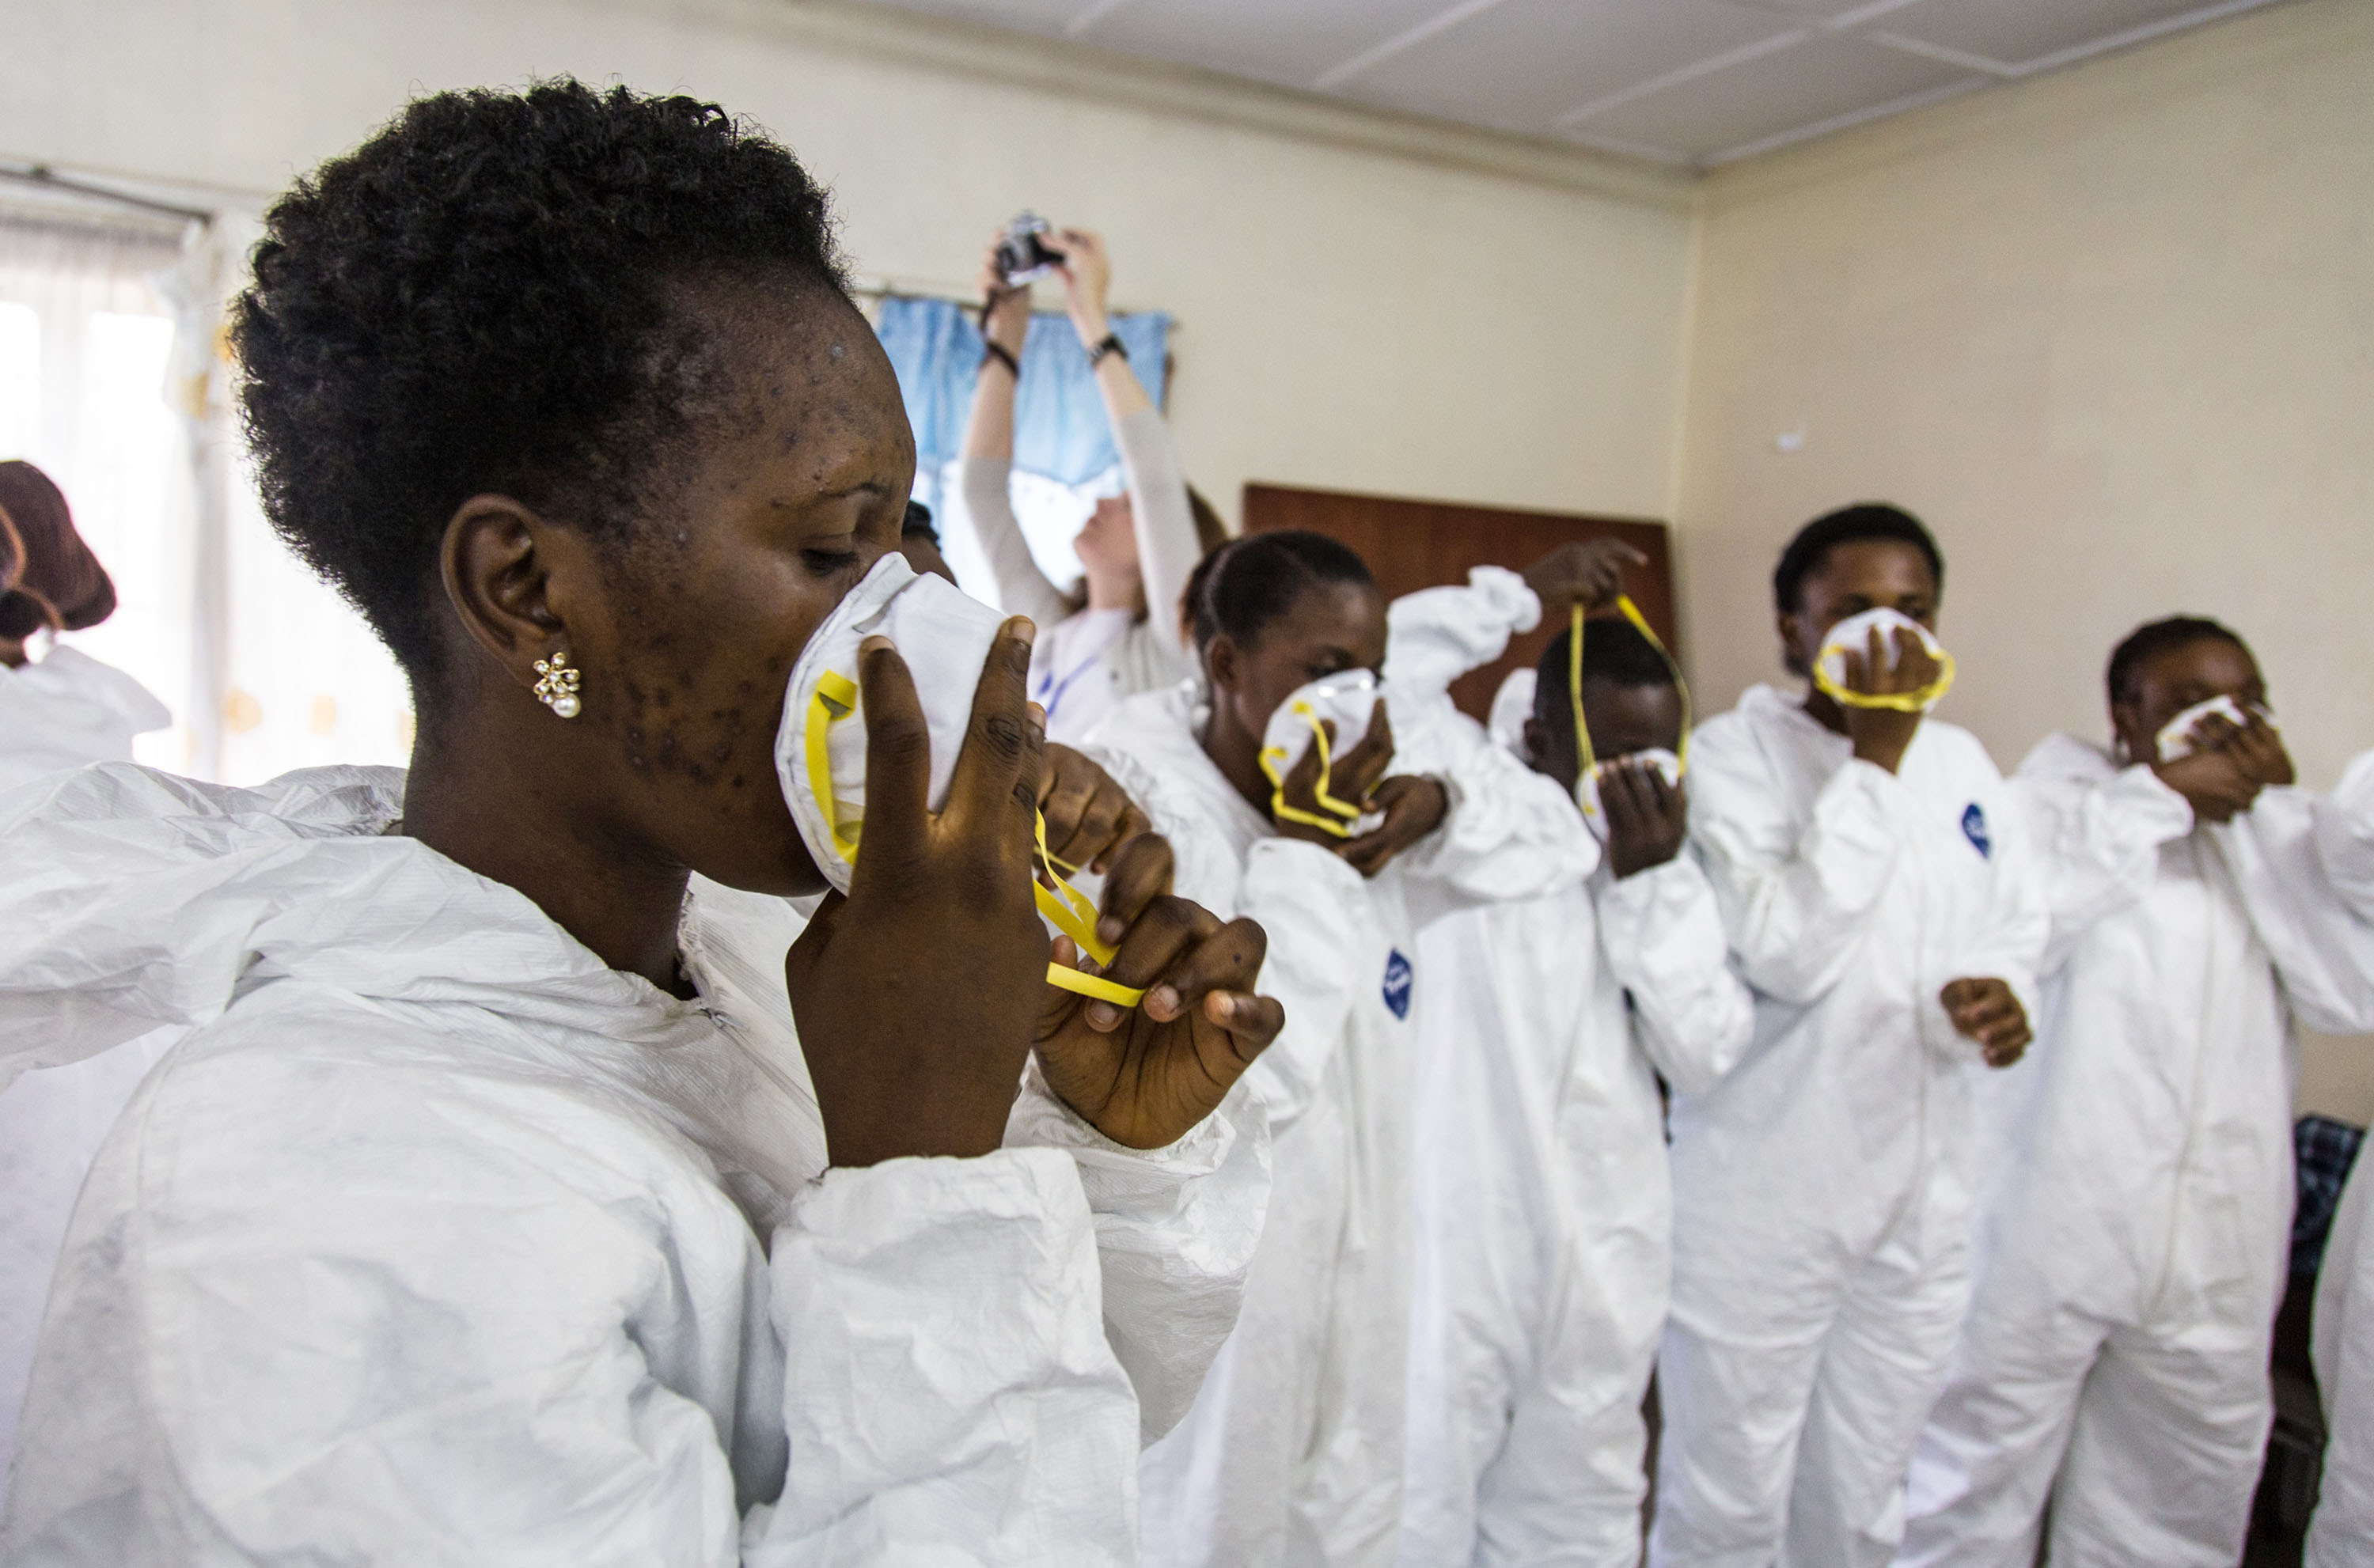 Nurses in Sierra Leone learn to use protective gear to prevent the spread of Ebola. Photo: AP